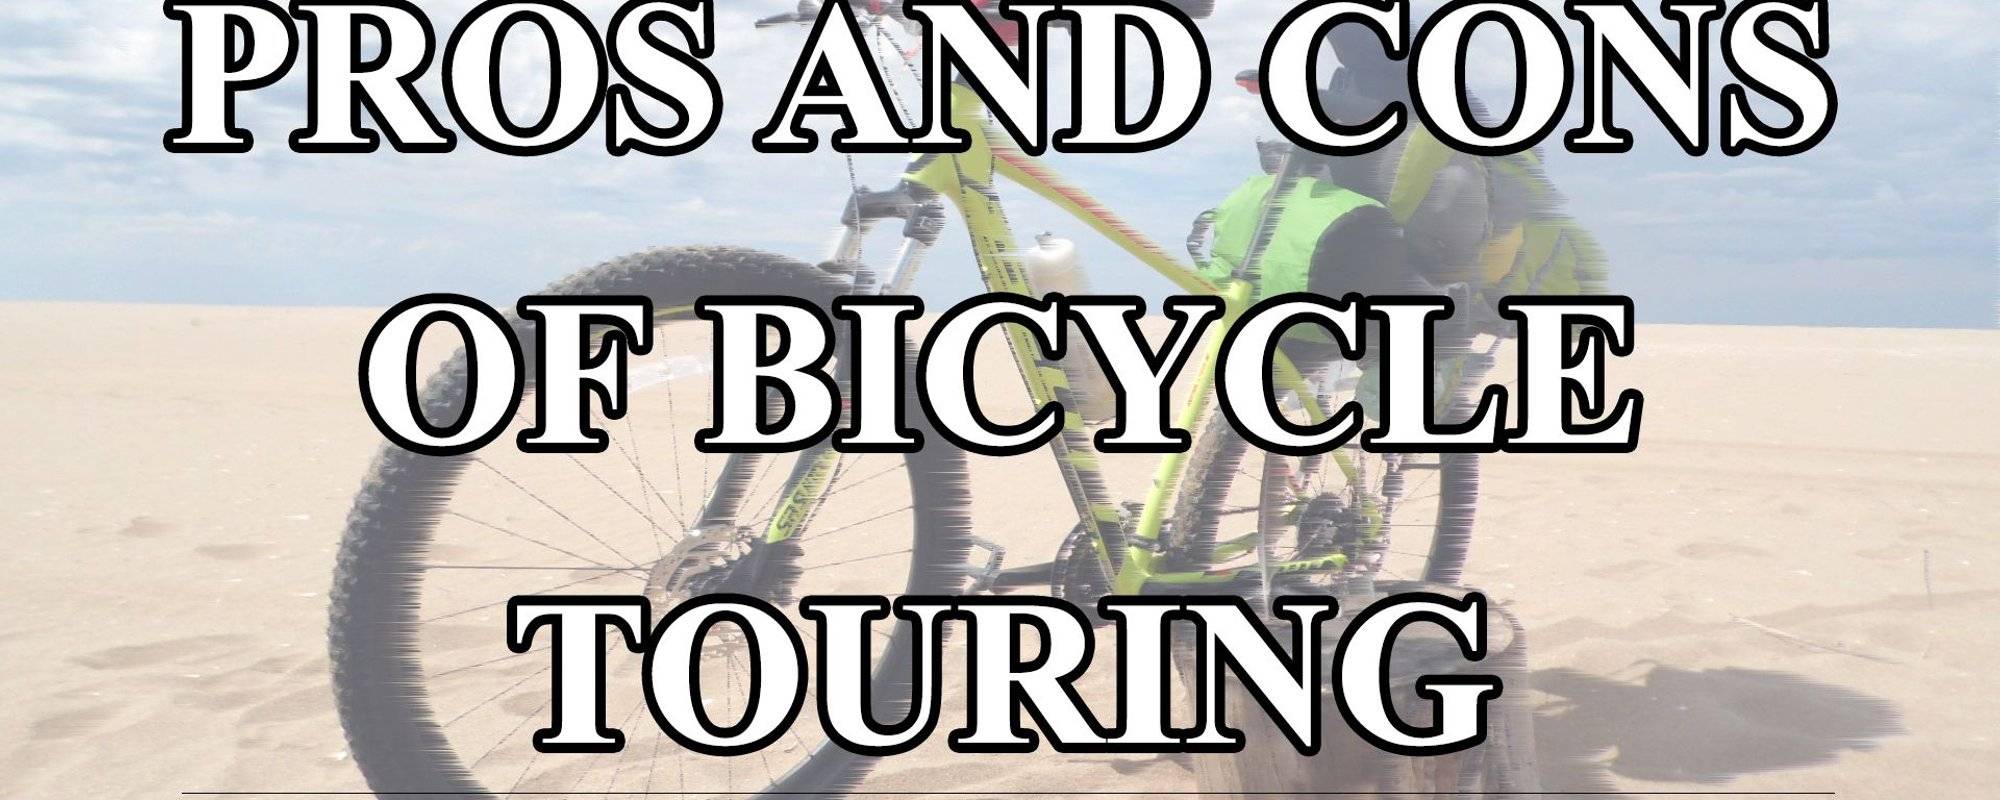 TRAVEL: PROS AND CONS OF BICYCLE TOURING